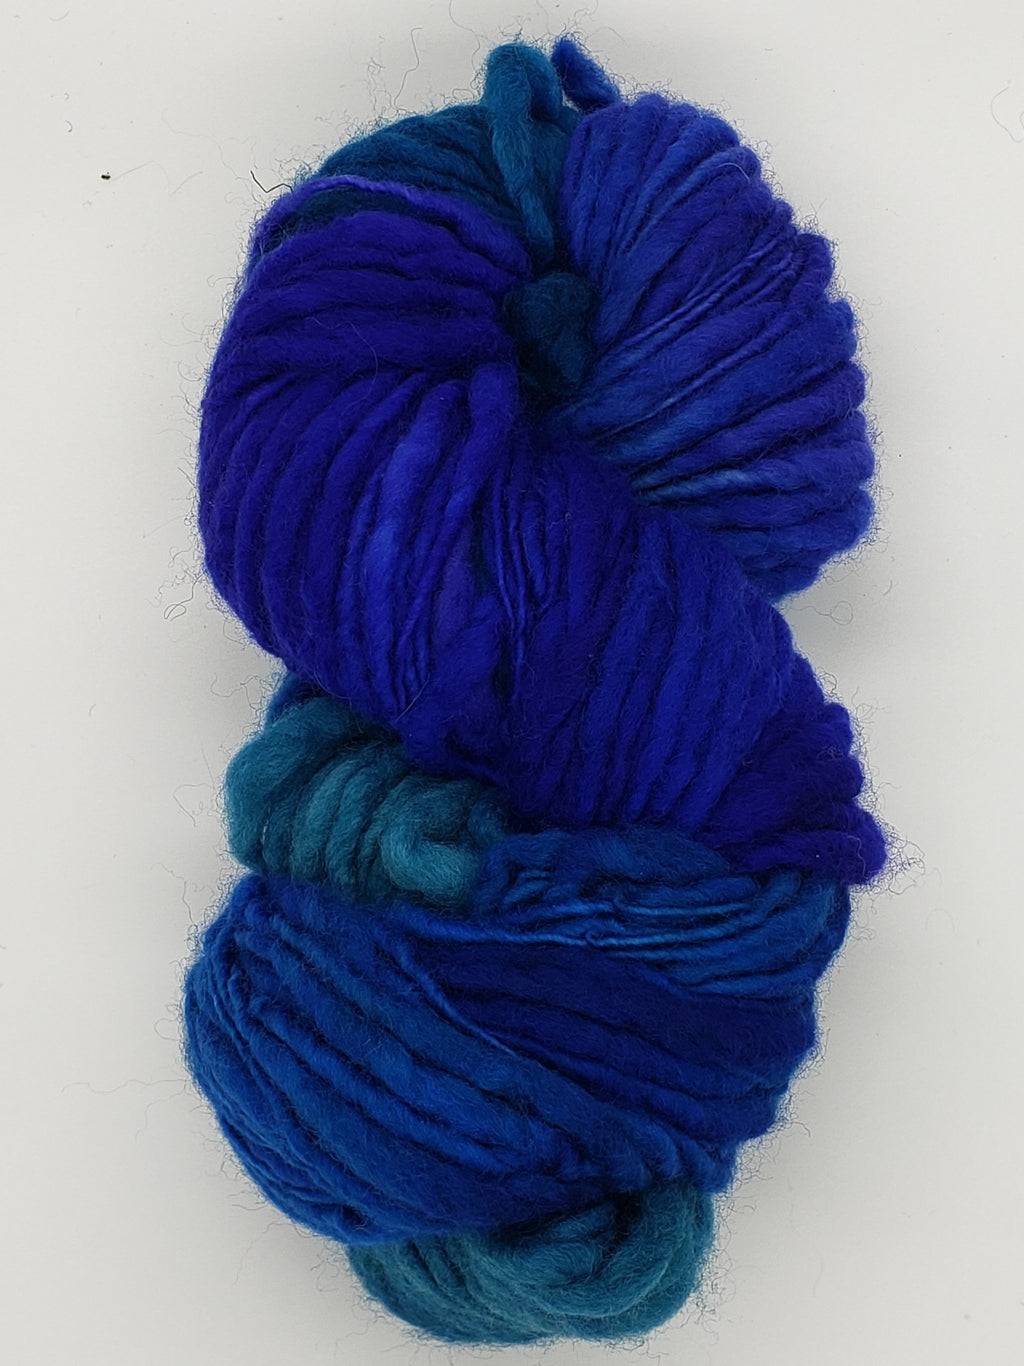 Slubby - MARINE - Merino/Blue Face Leicester - Hand Dyed Textured Yarn Thick and Thin  - Shades of Blue